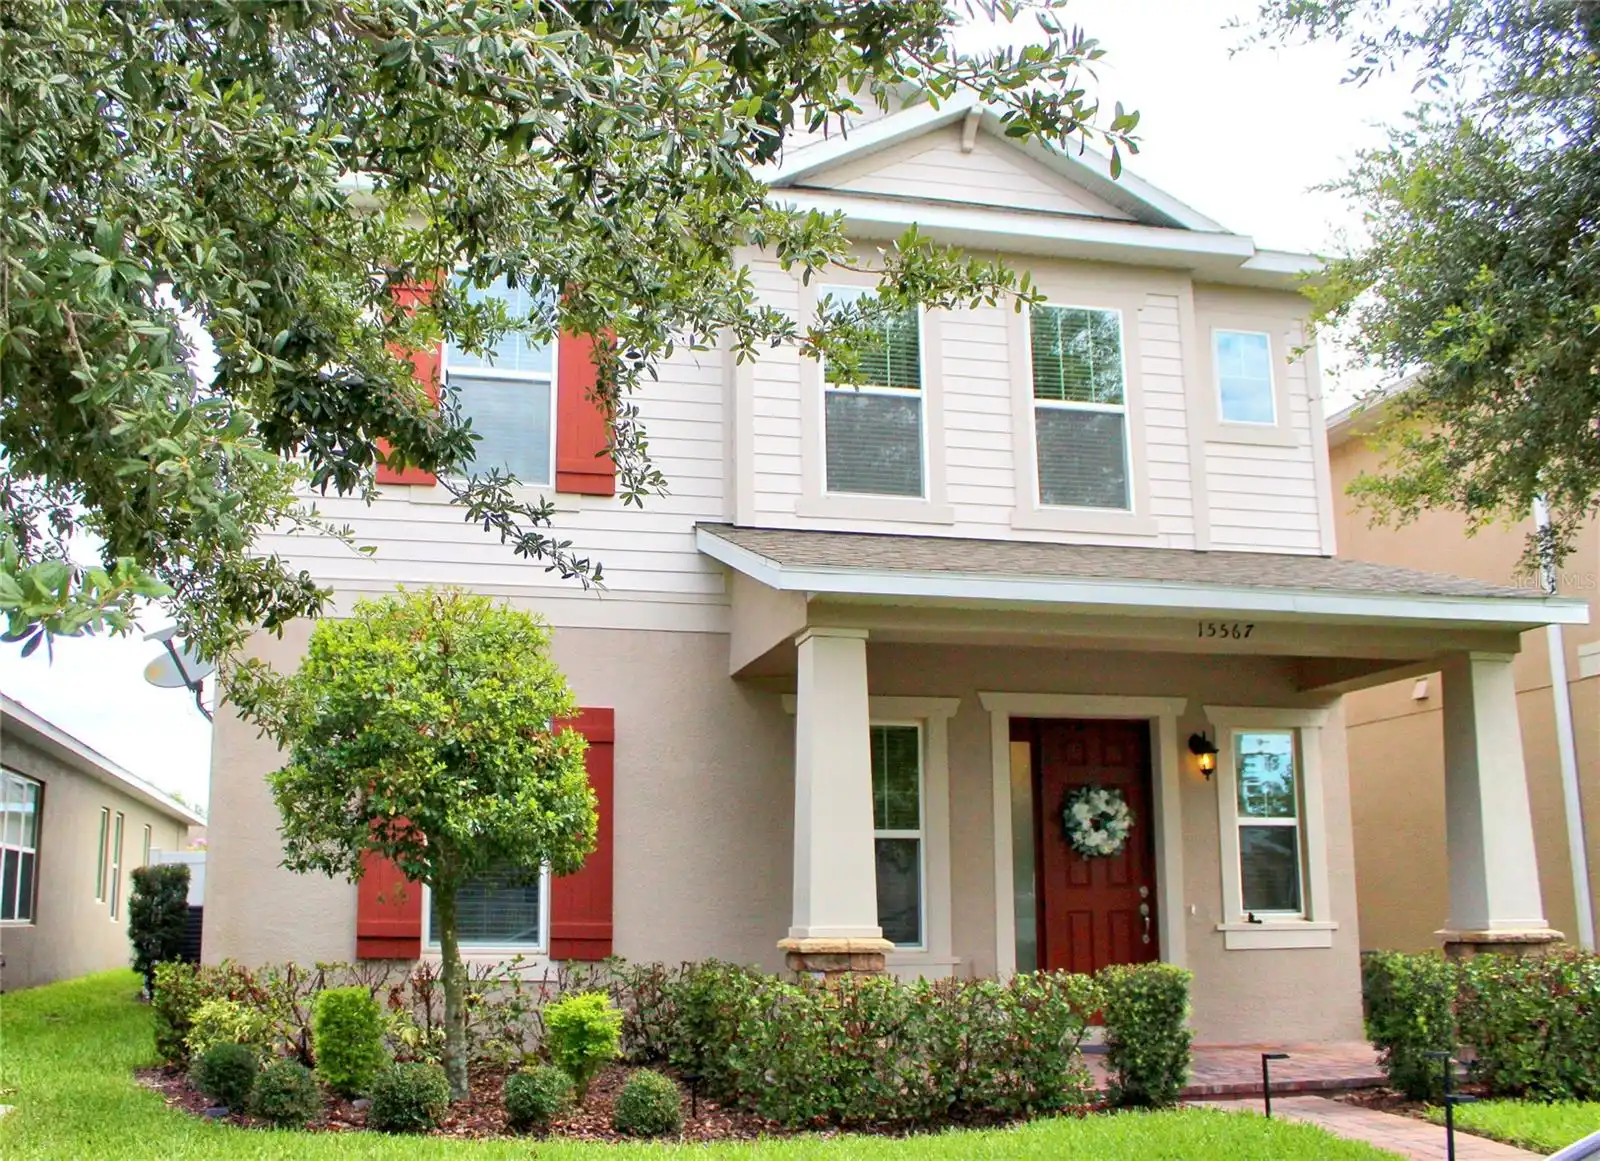 4BR, Residential Lease, 3BA, $3,200
Read More